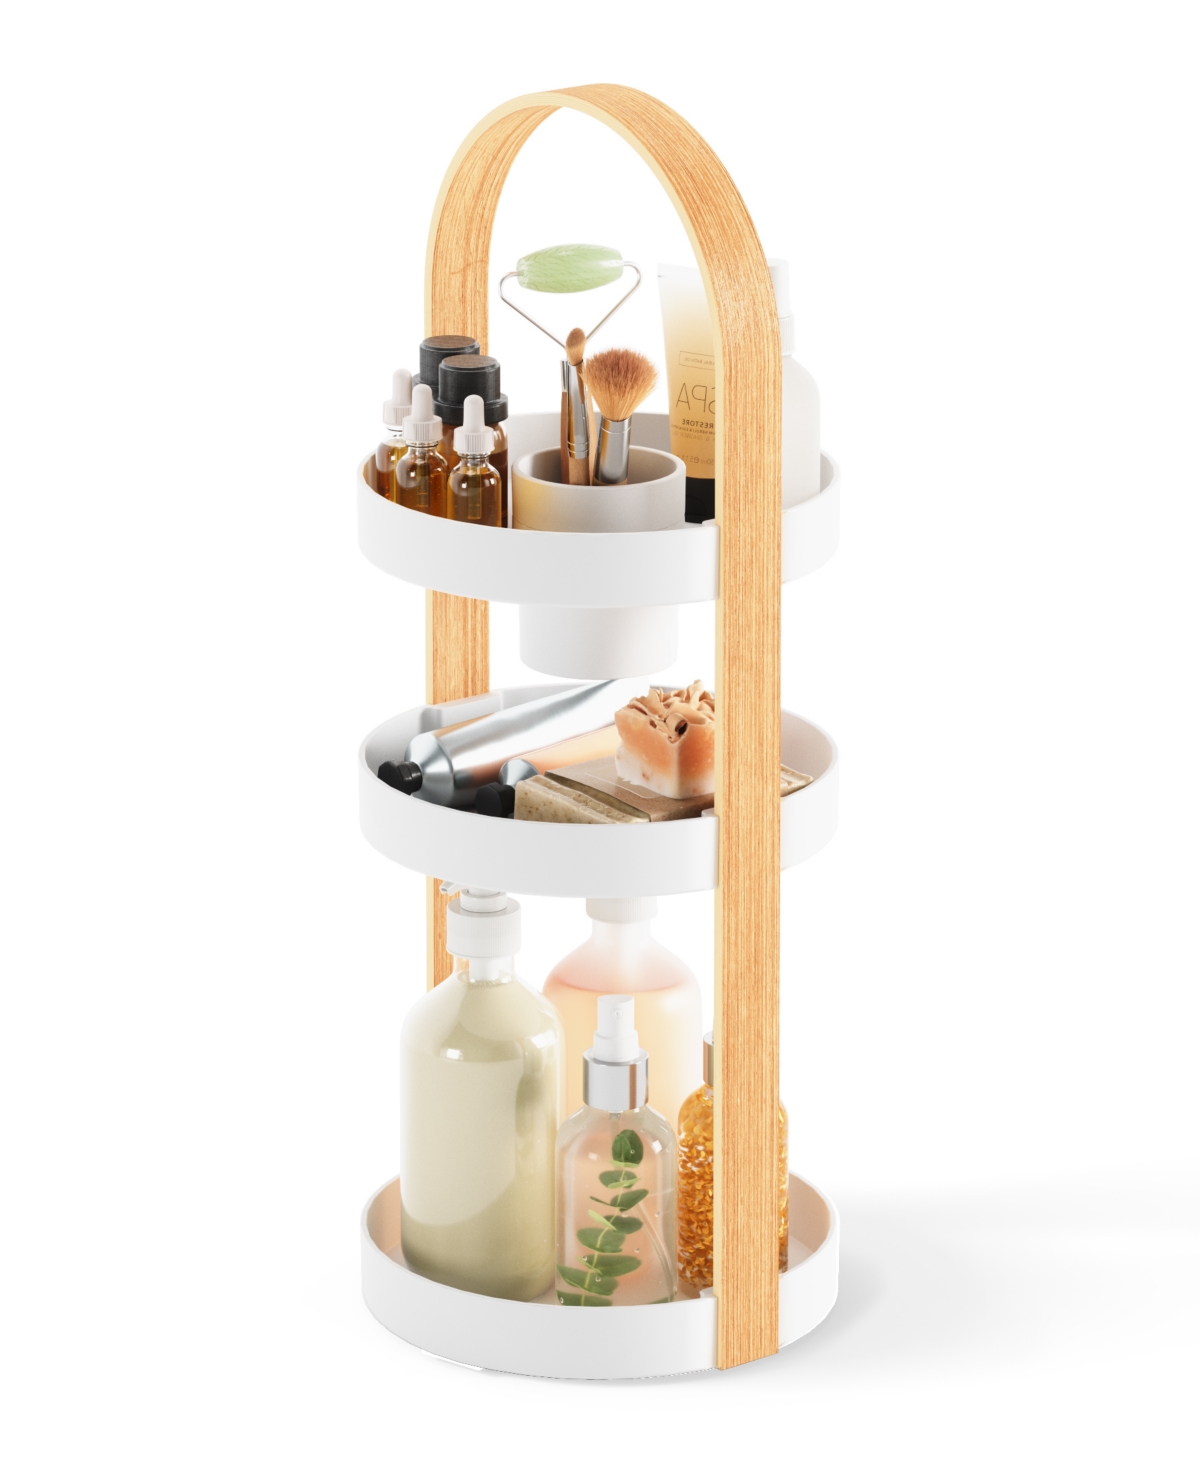 Bellwood Cosmetic Organizer - White, Natural